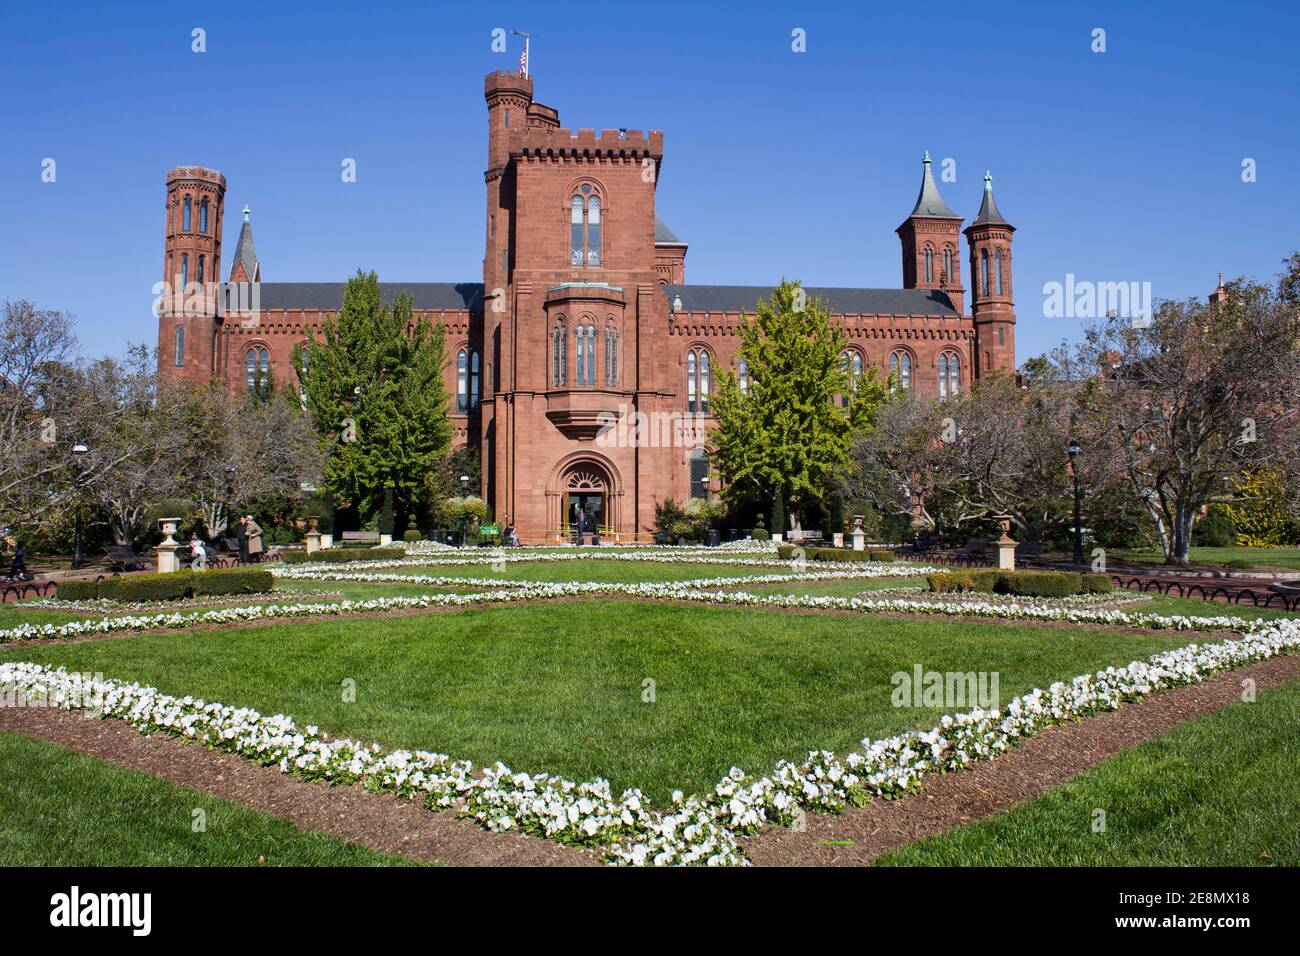 view of red brick castle like headquarters of the Smithsonian Institute on national mall Stock Photo